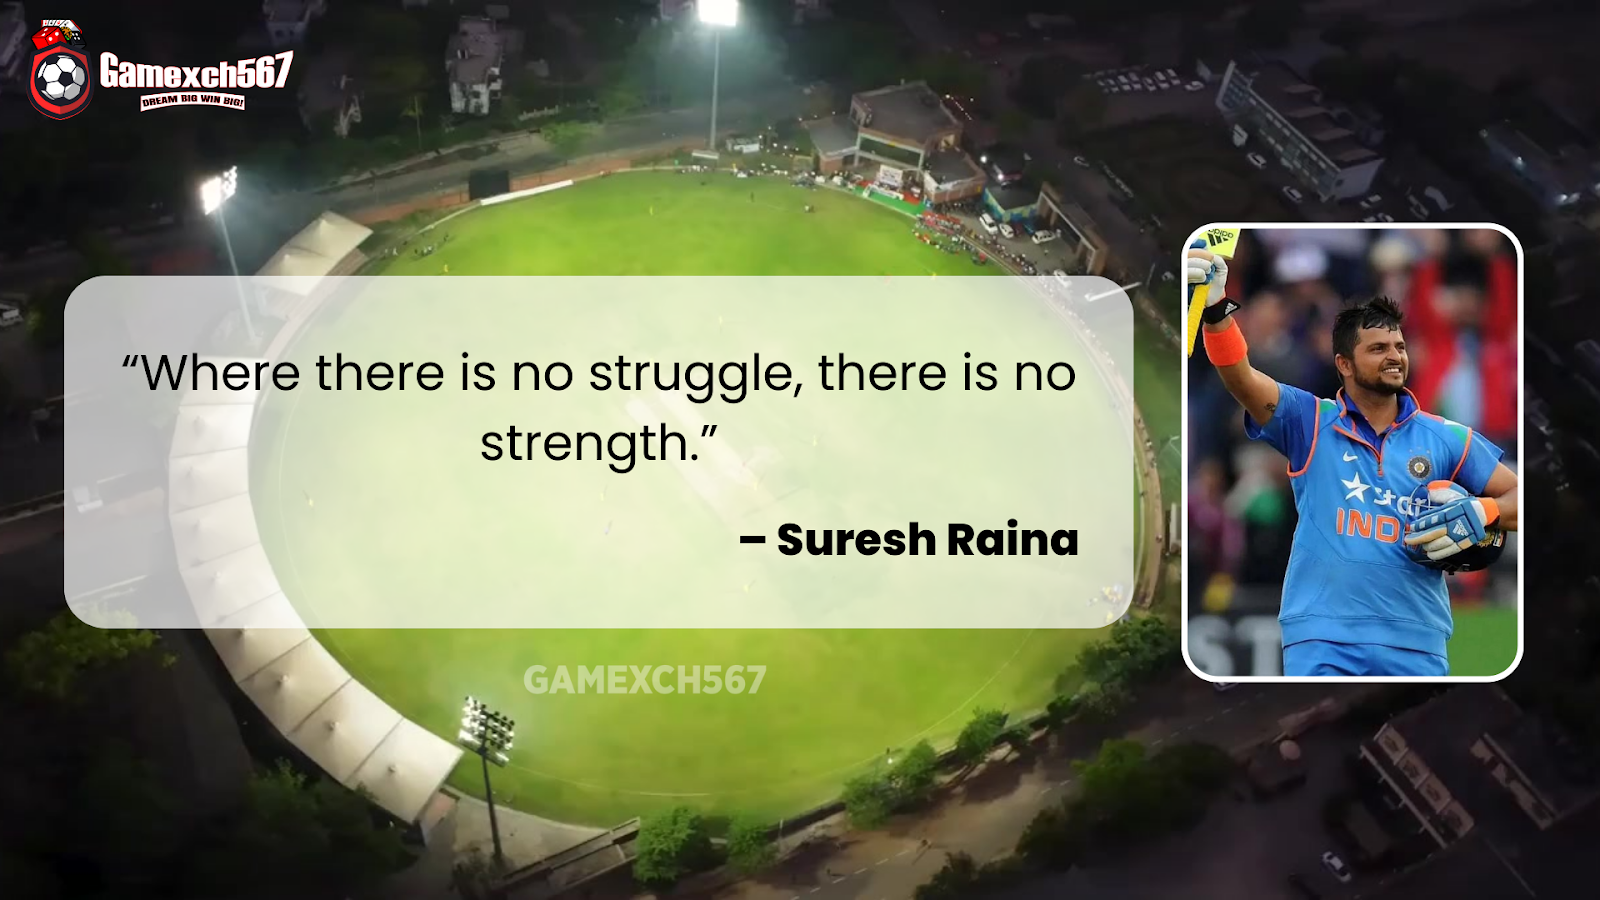 “Where there is no struggle, there is no strength.” – Suresh Raina